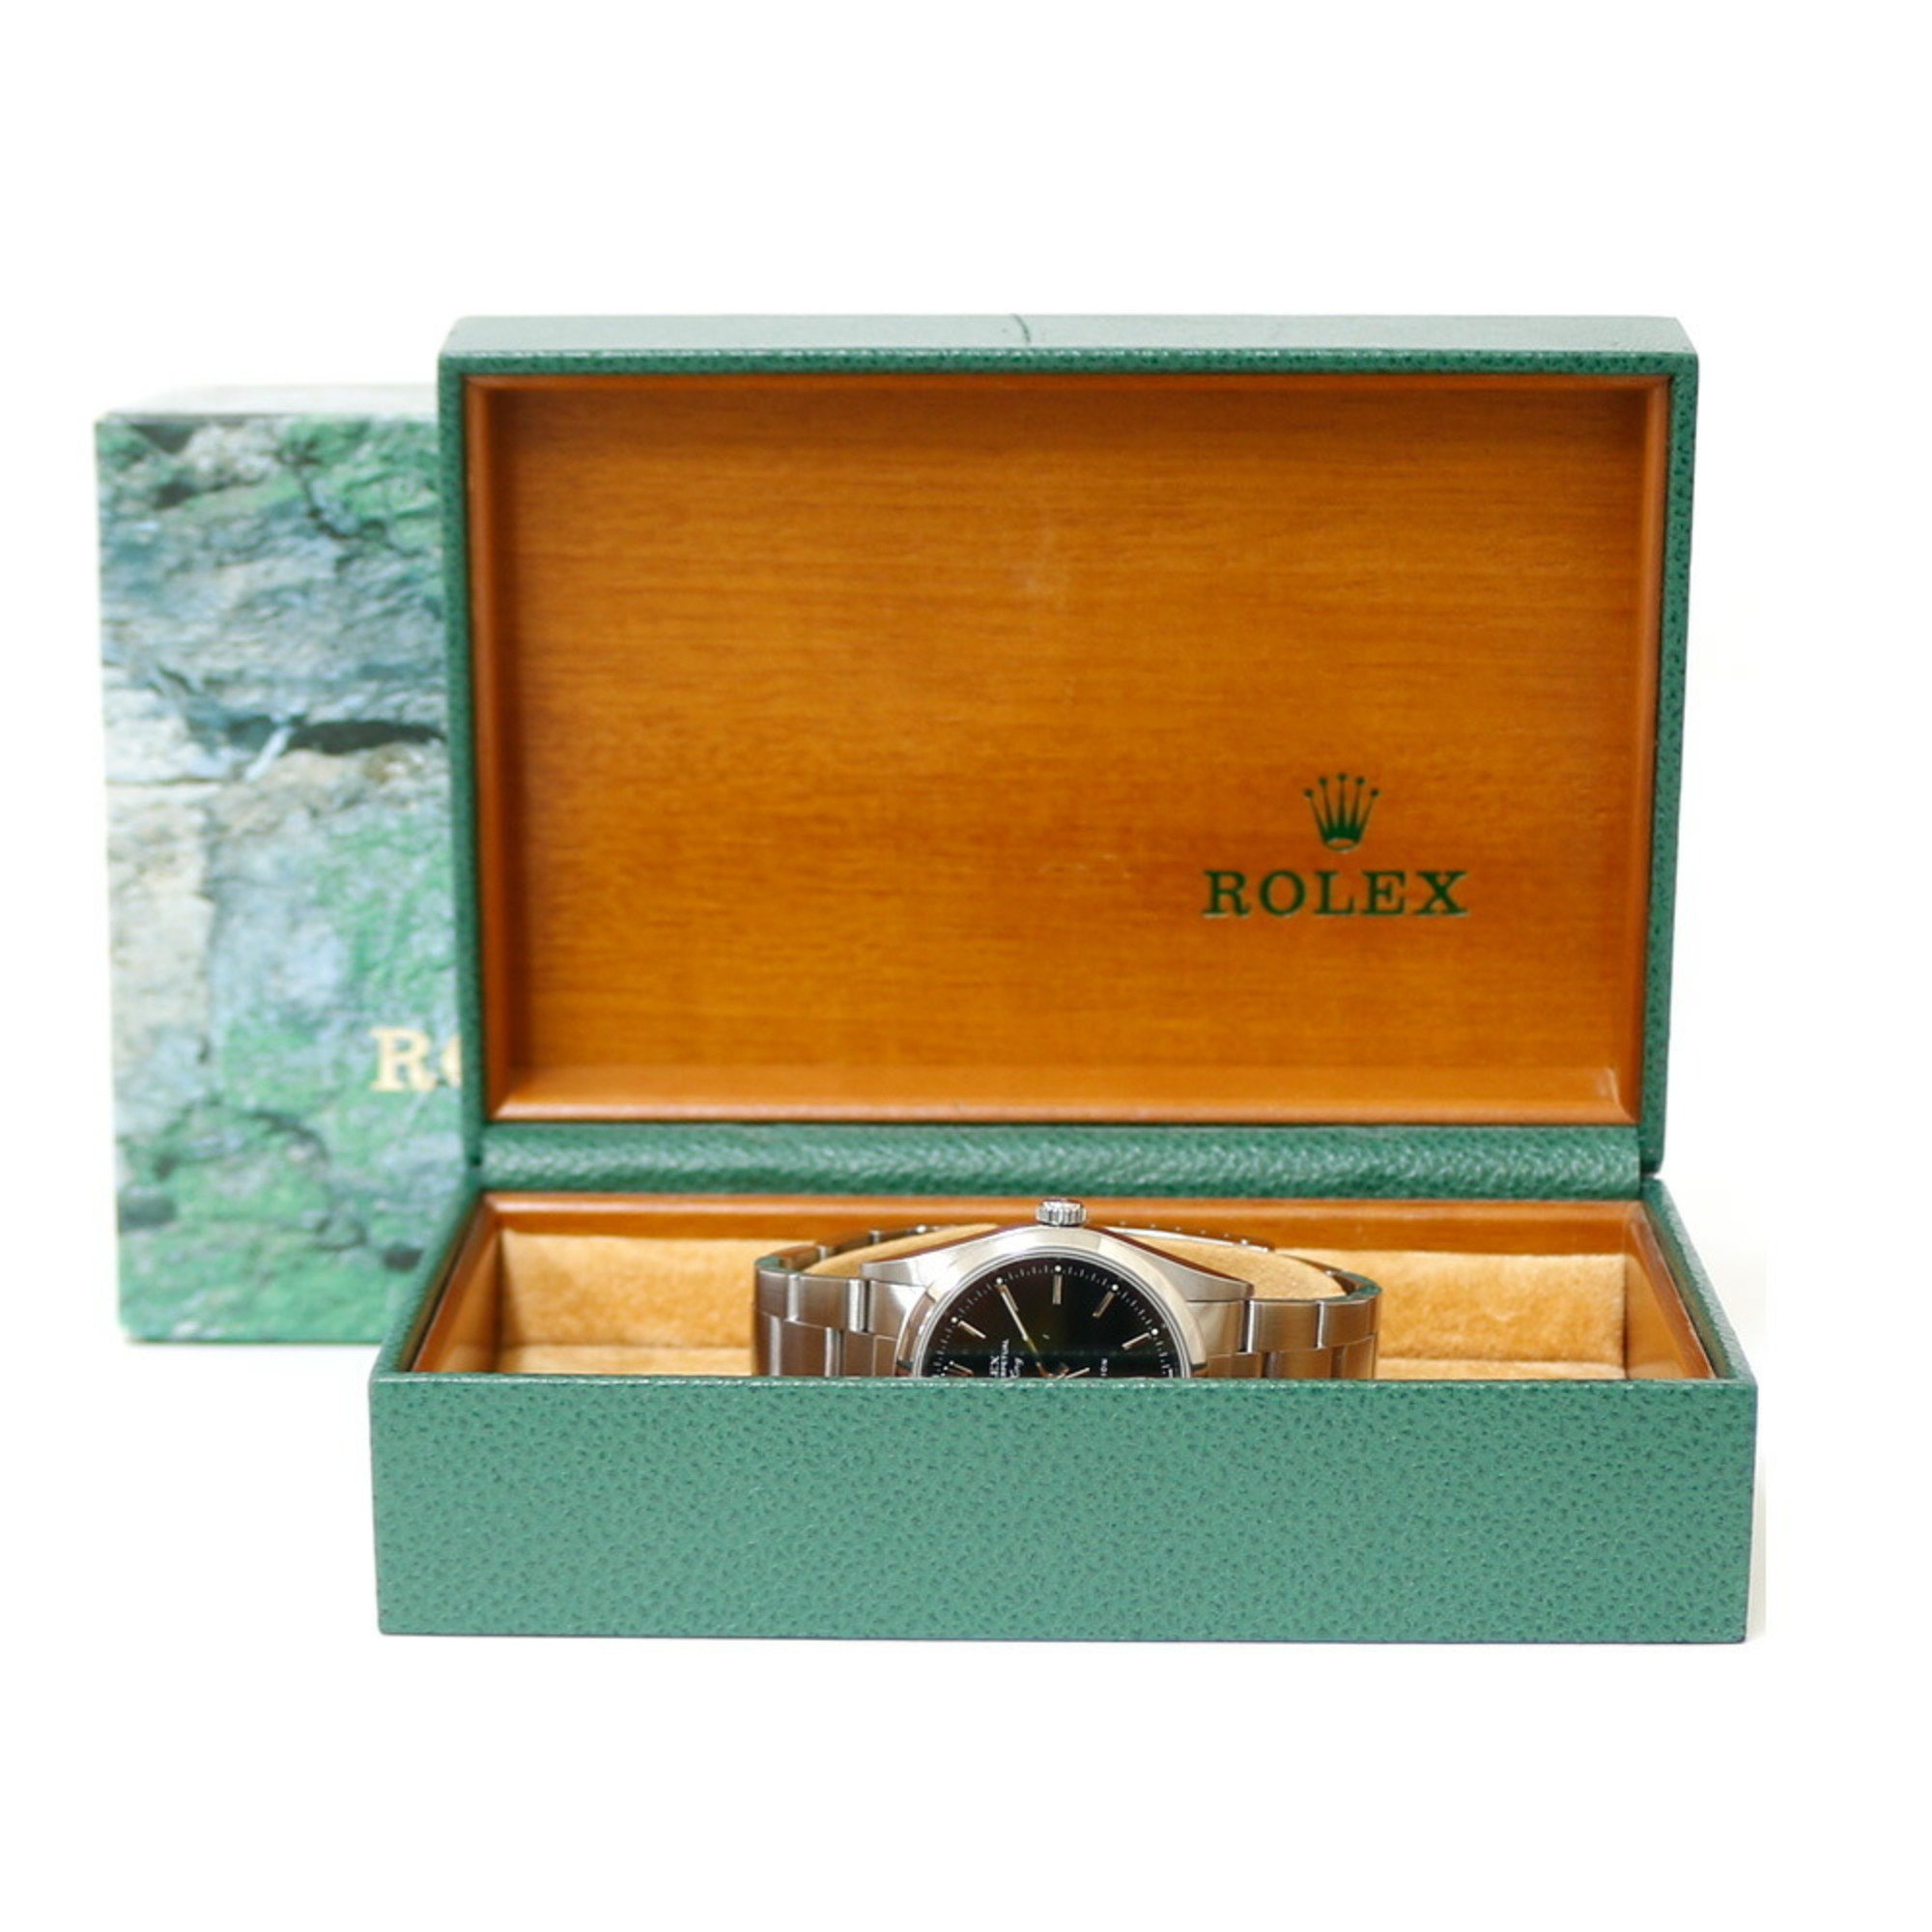 Rolex Air King Oyster Perpetual Watch Stainless Steel 14000M Automatic Men's ROLEX F Series 2003-2004 Model Overhauled